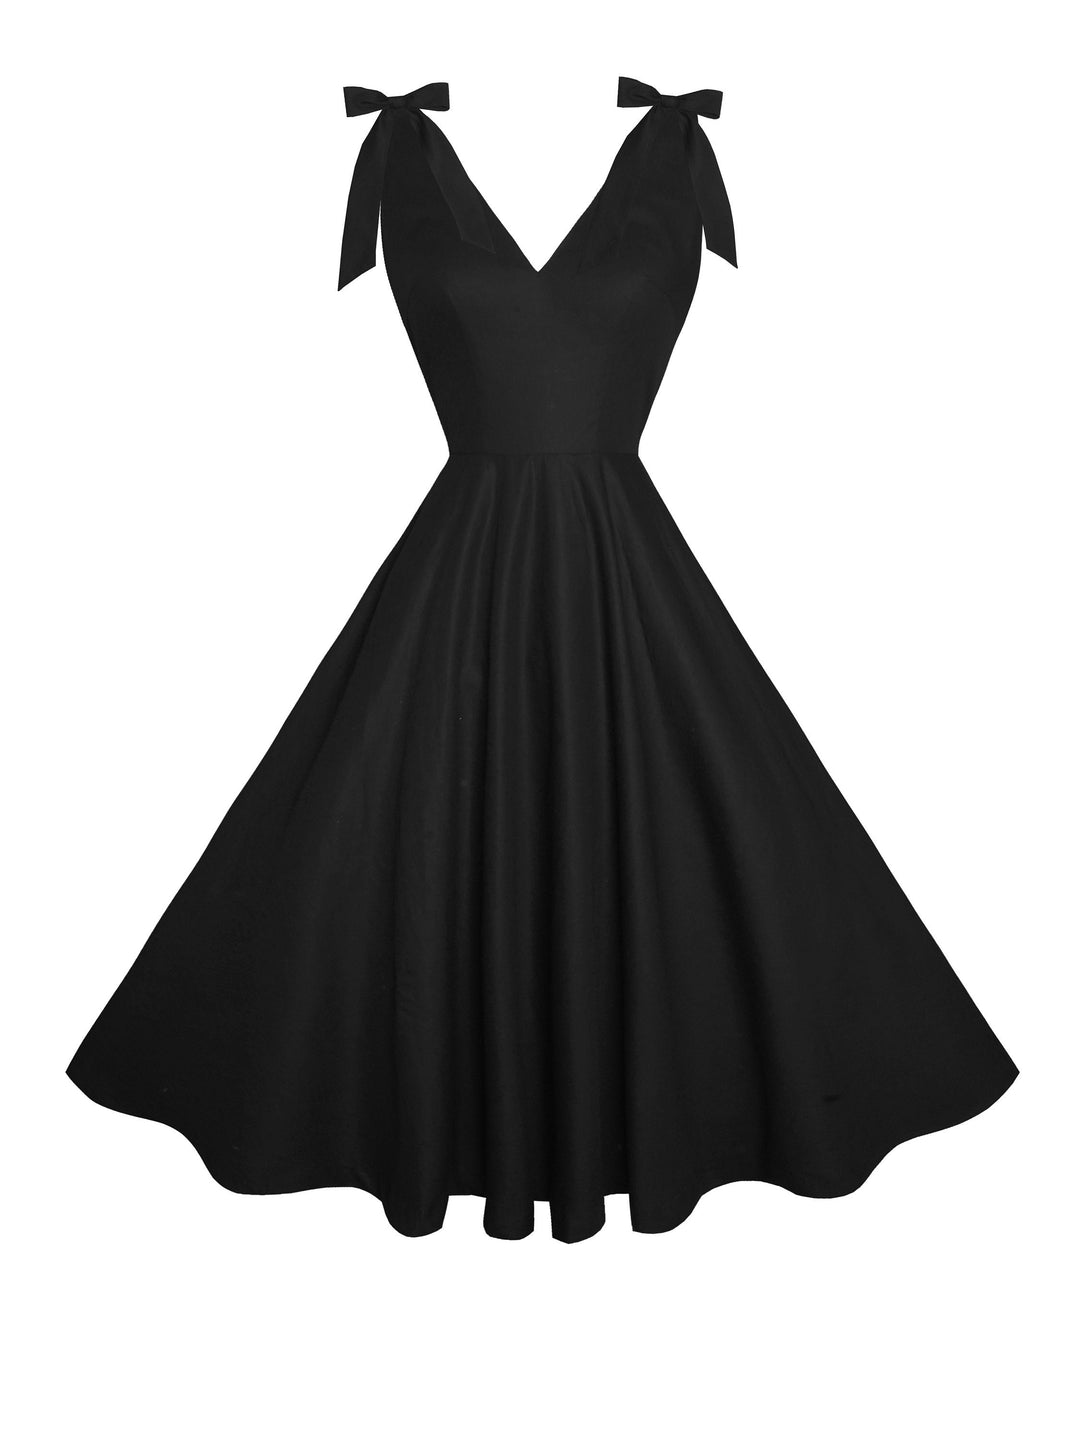 RTS - Size S - Daisy Dress in Raven Black Cotton